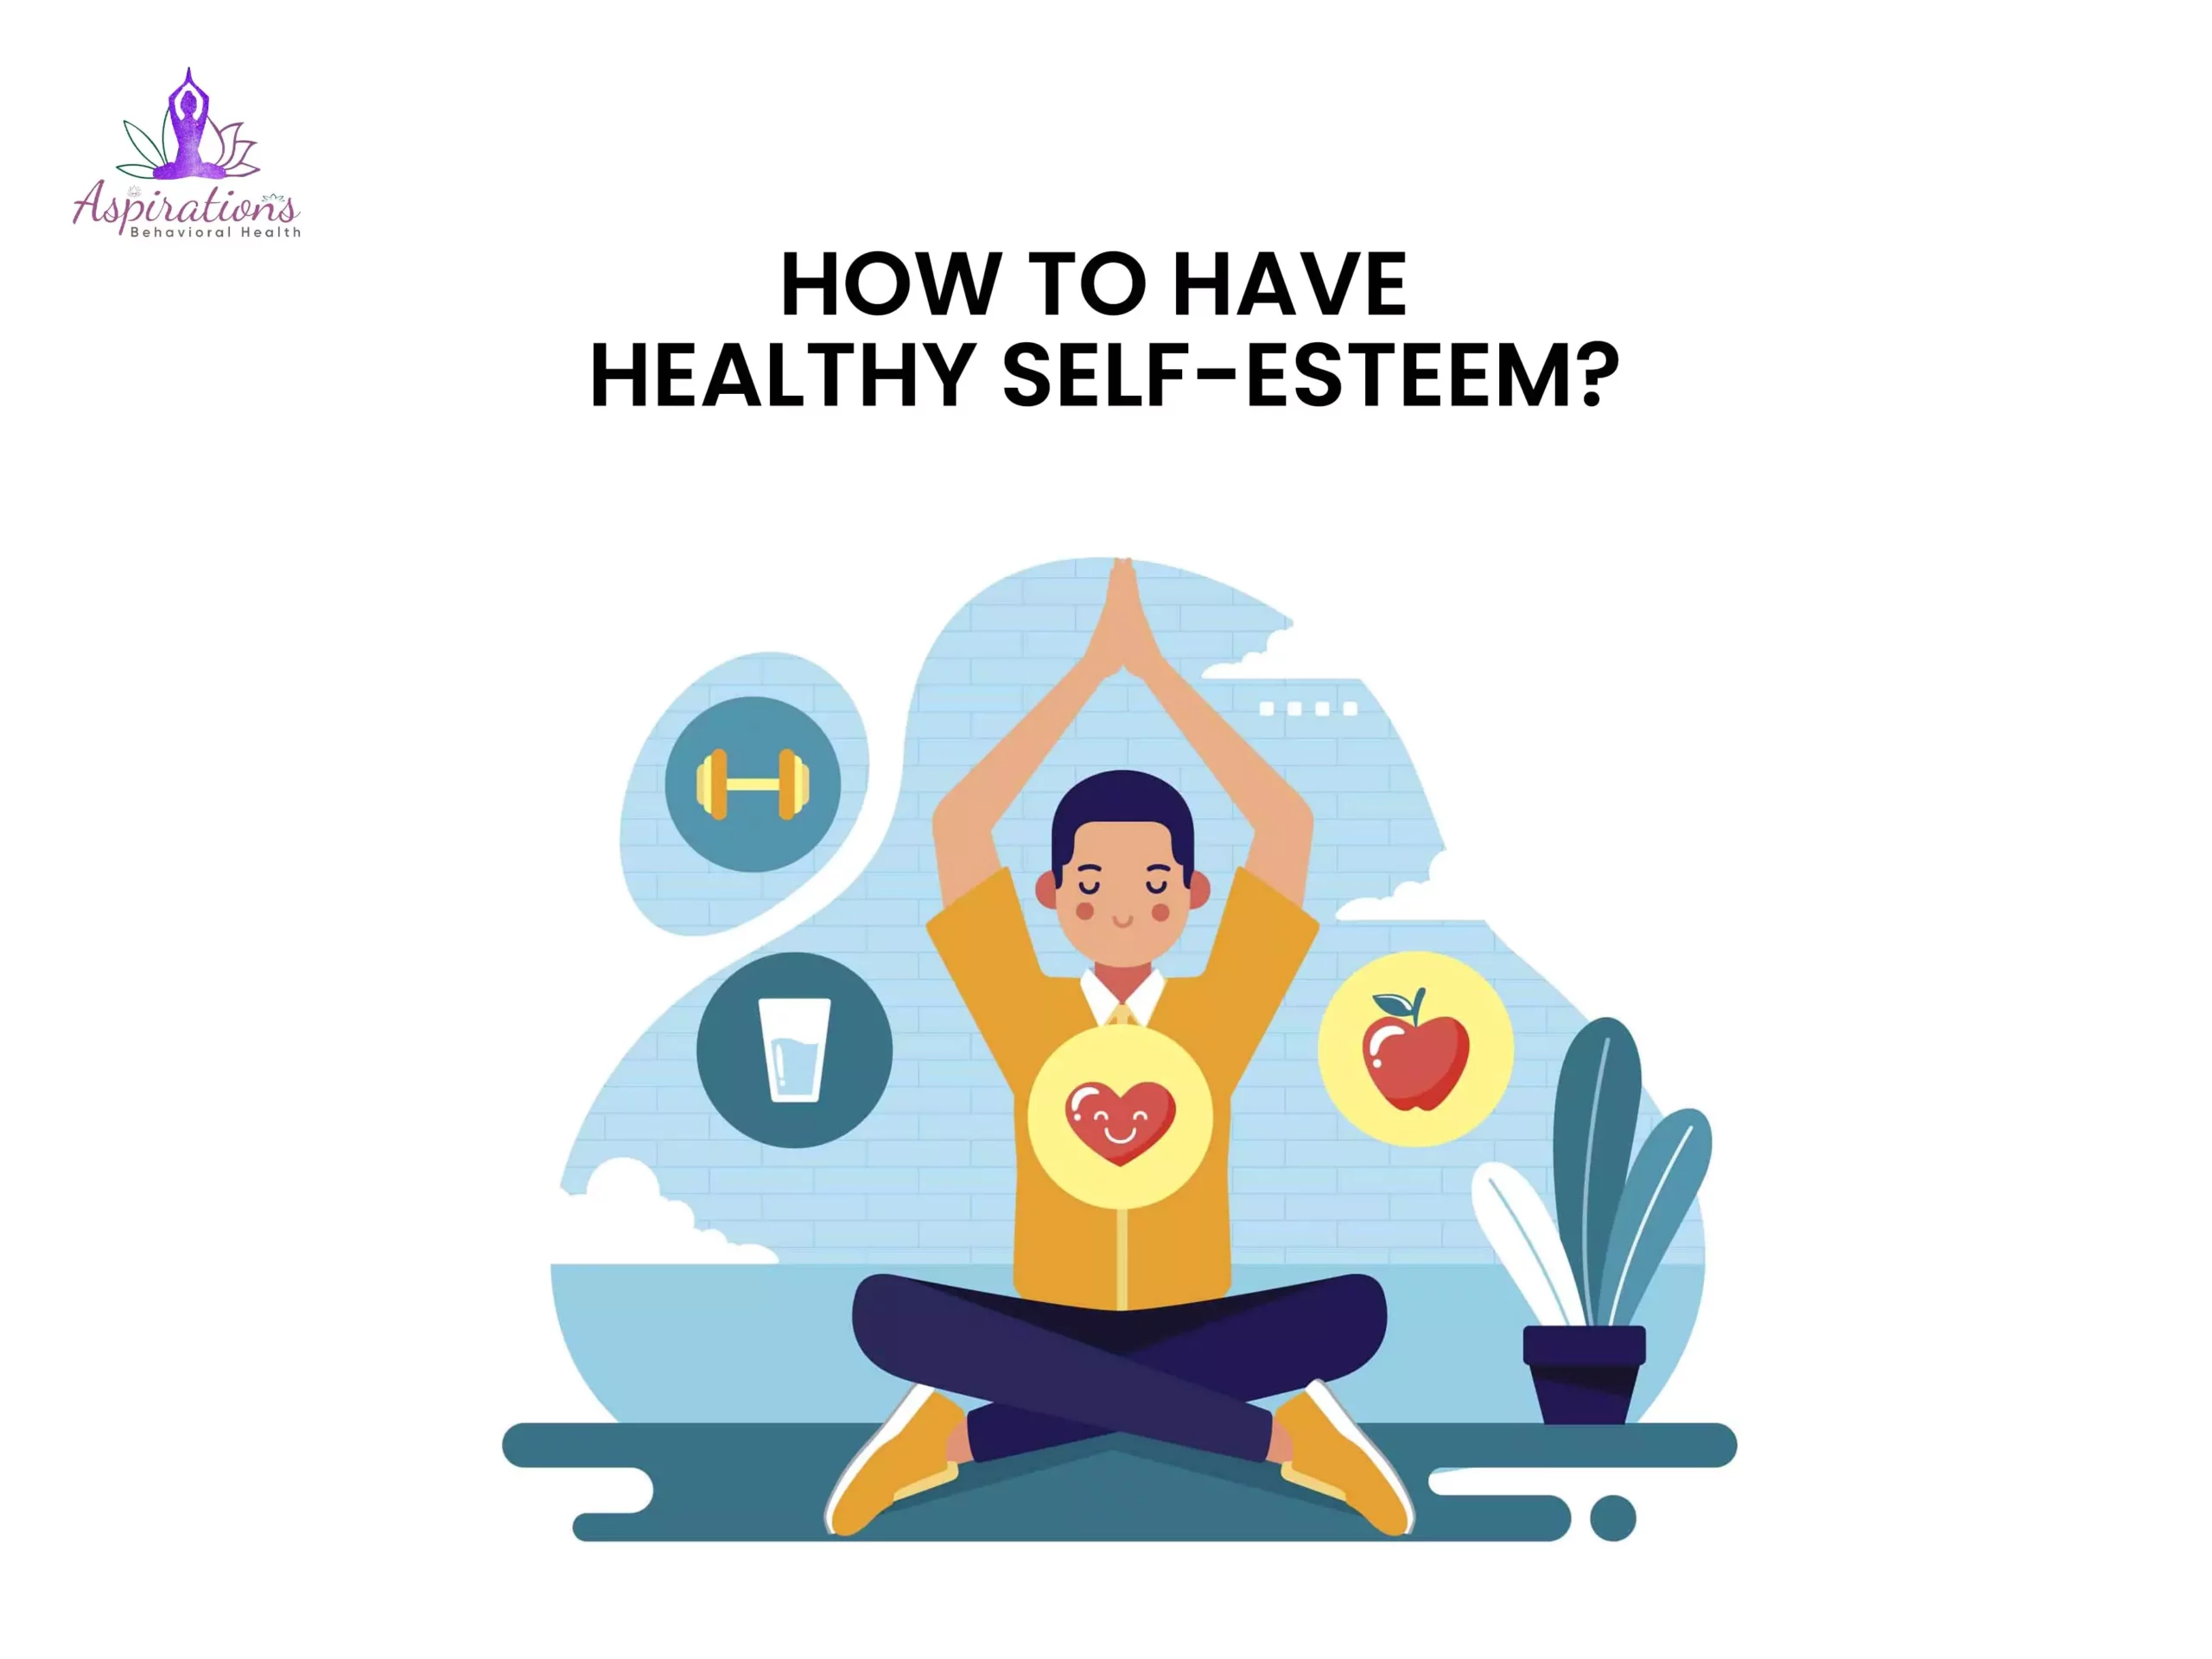 How to Have Healthy Self-Esteem?